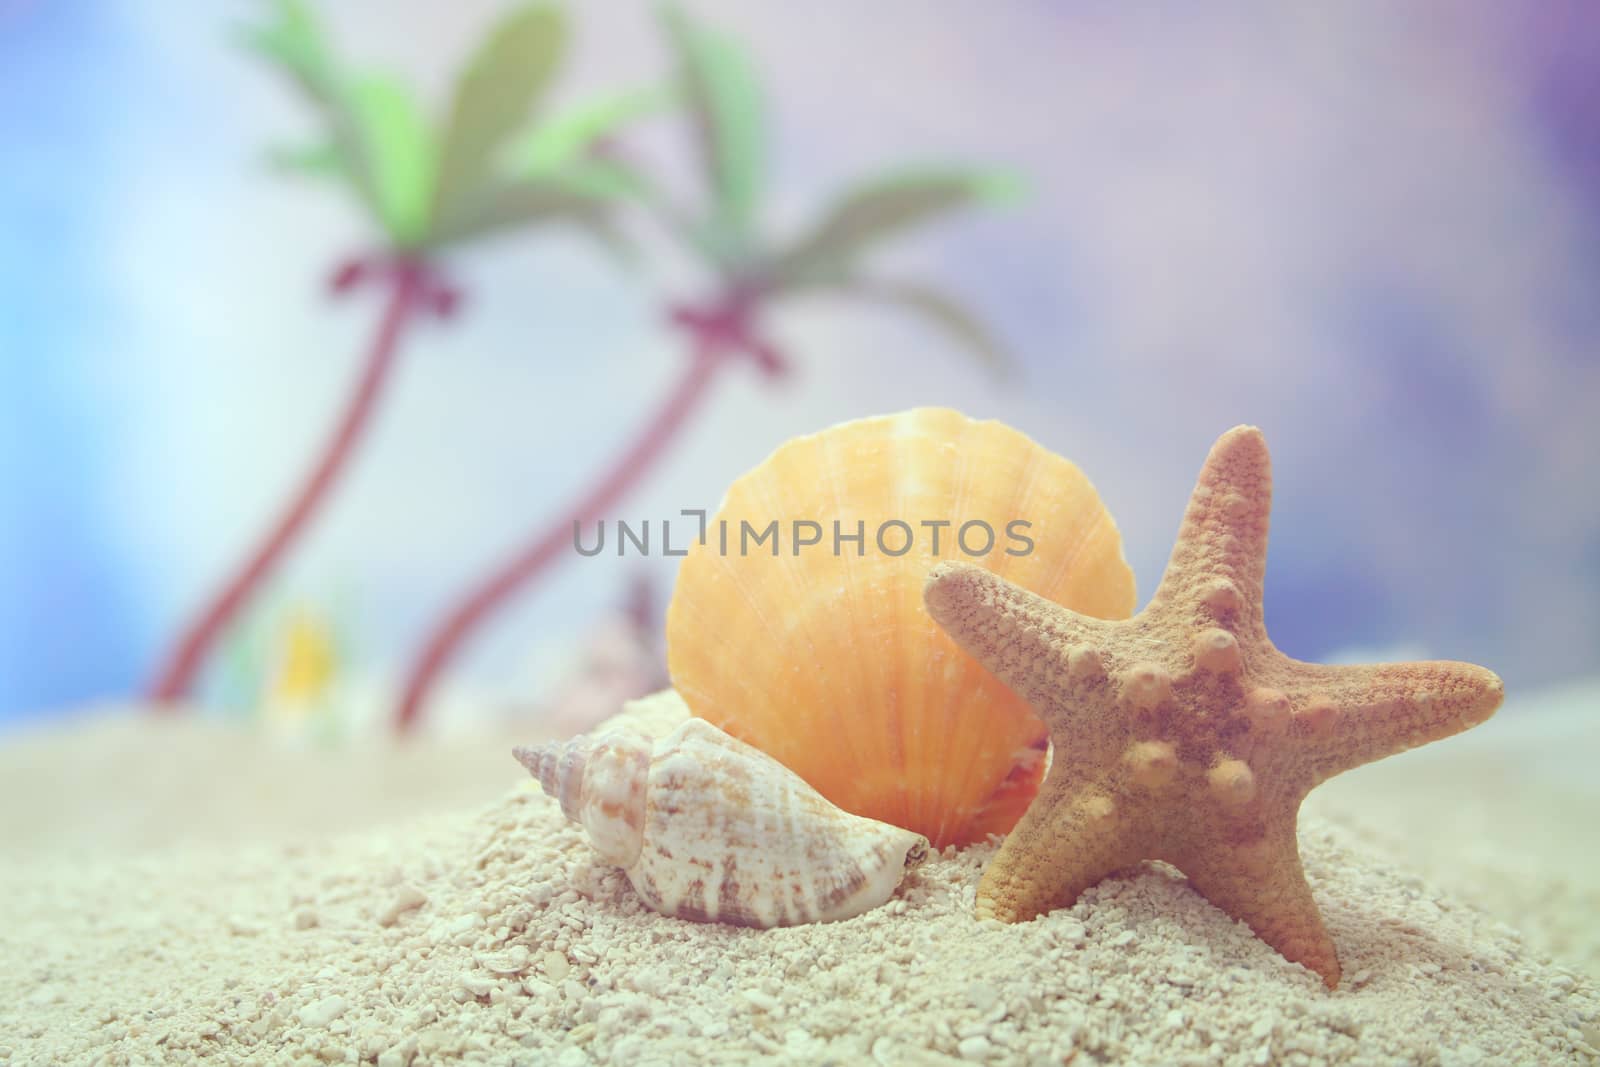 Tropical Beach With seashells in Bright Sunlight by Marti157900